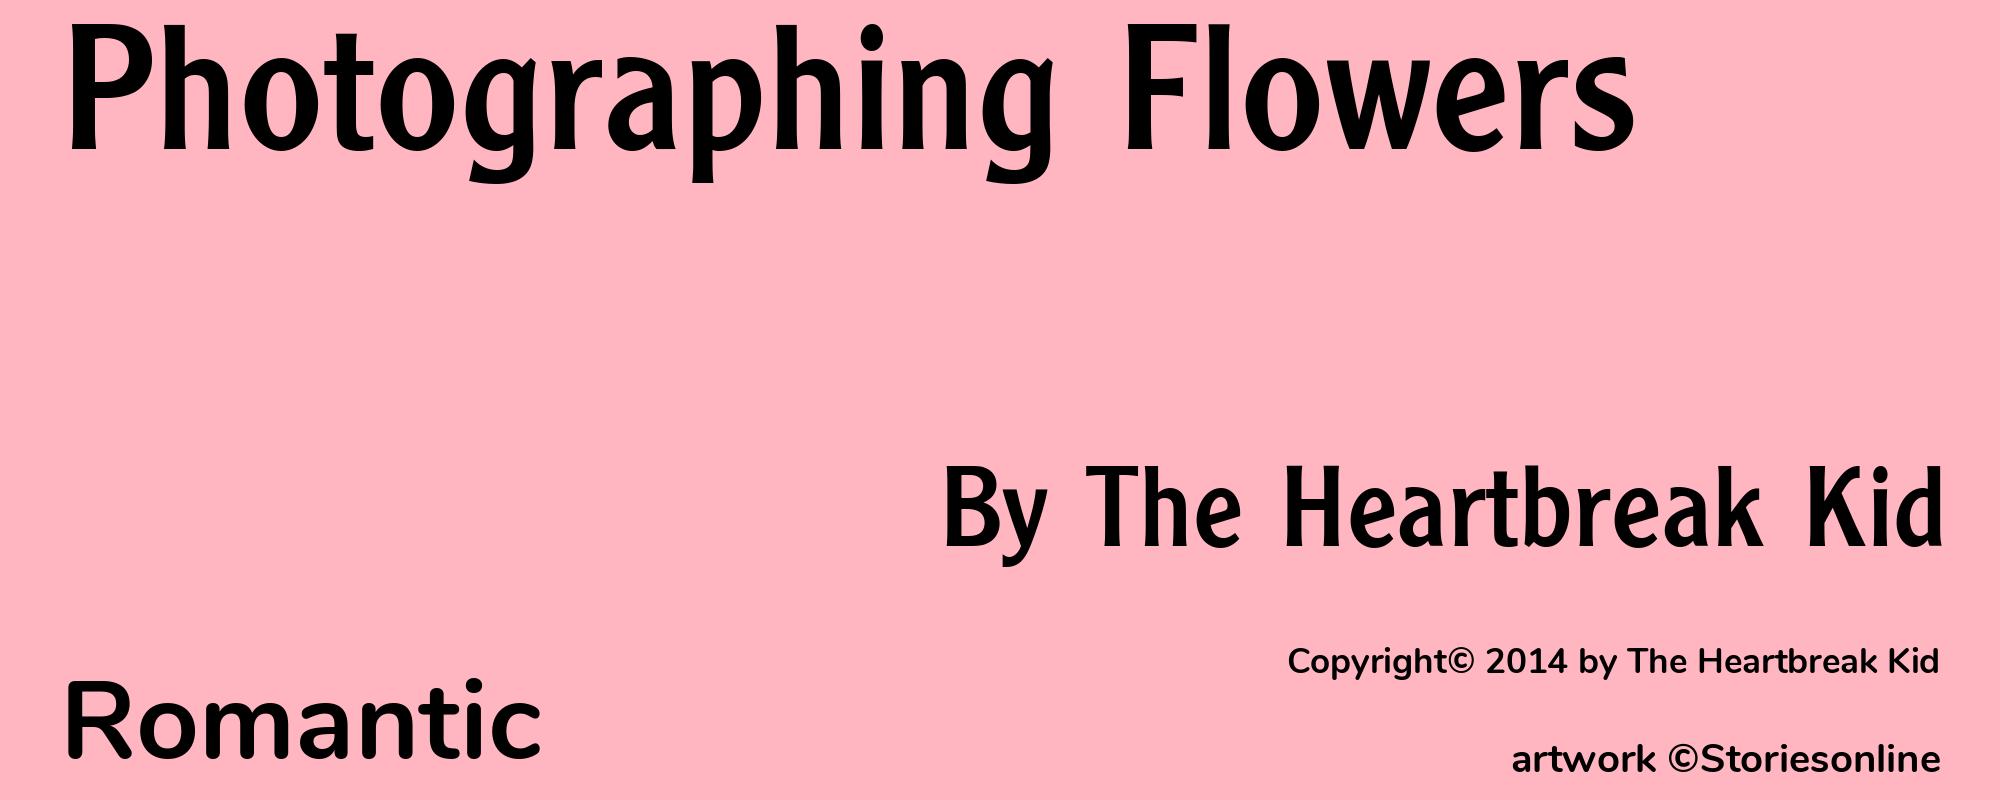 Photographing Flowers - Cover